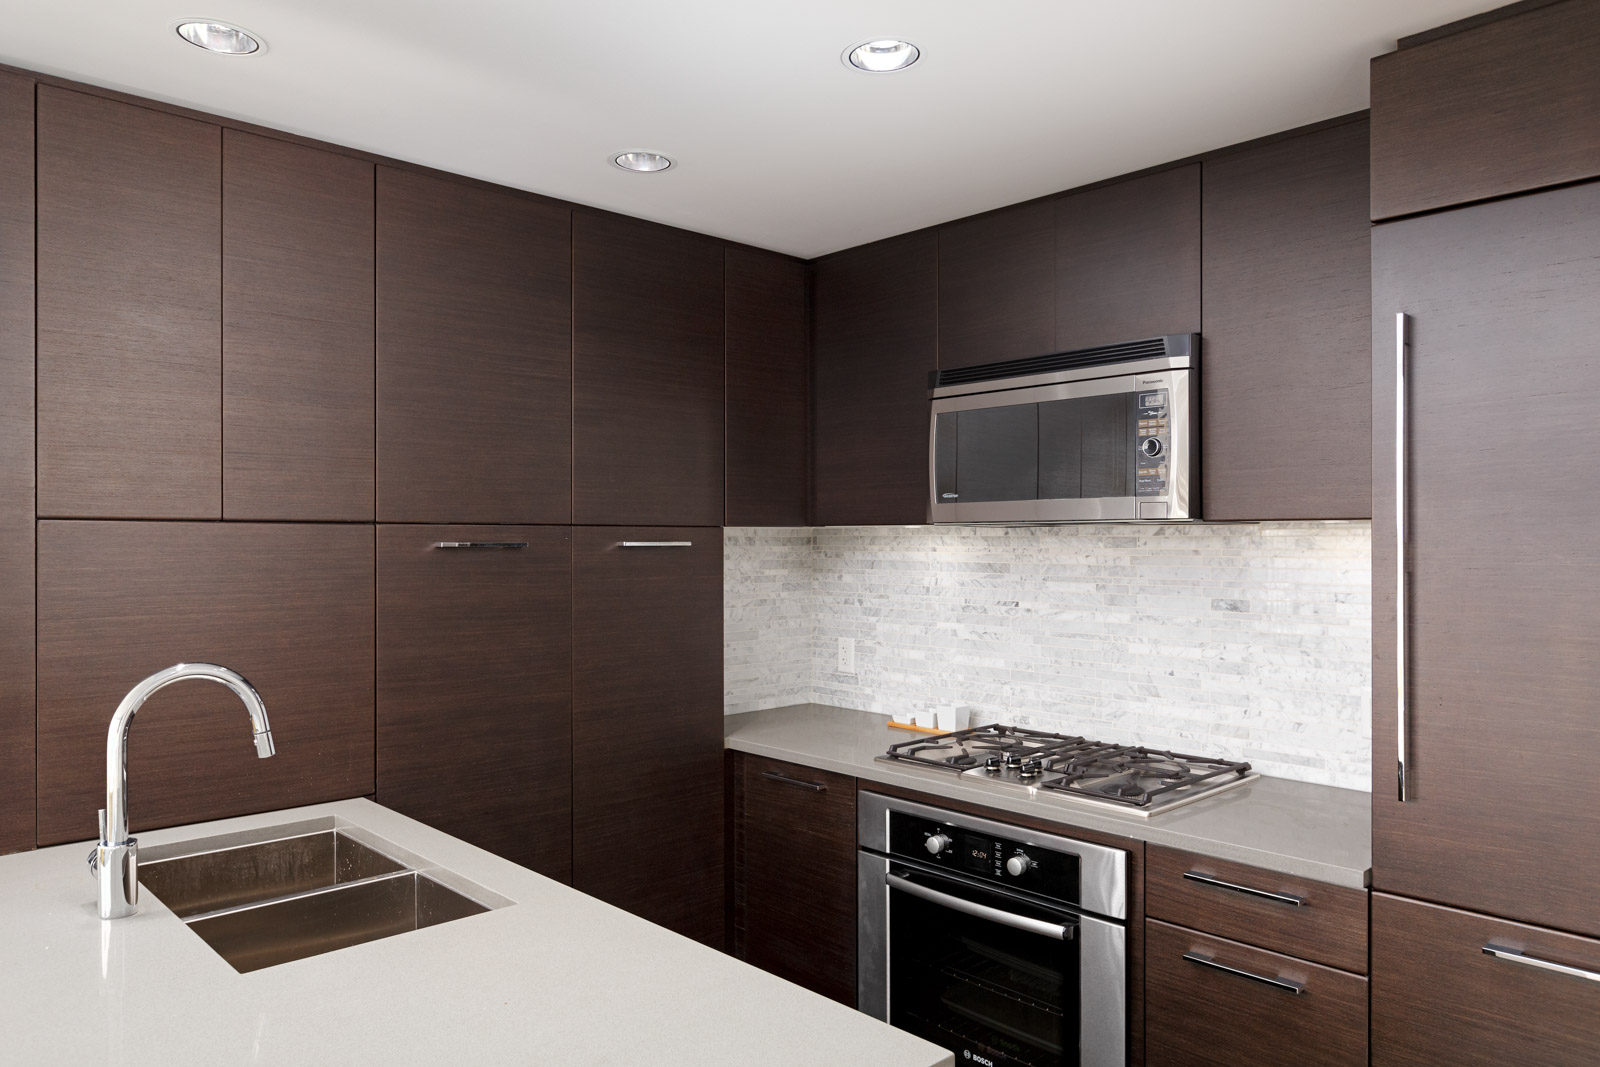 Kitchen with stainless steel appliances in UBC rental condo.